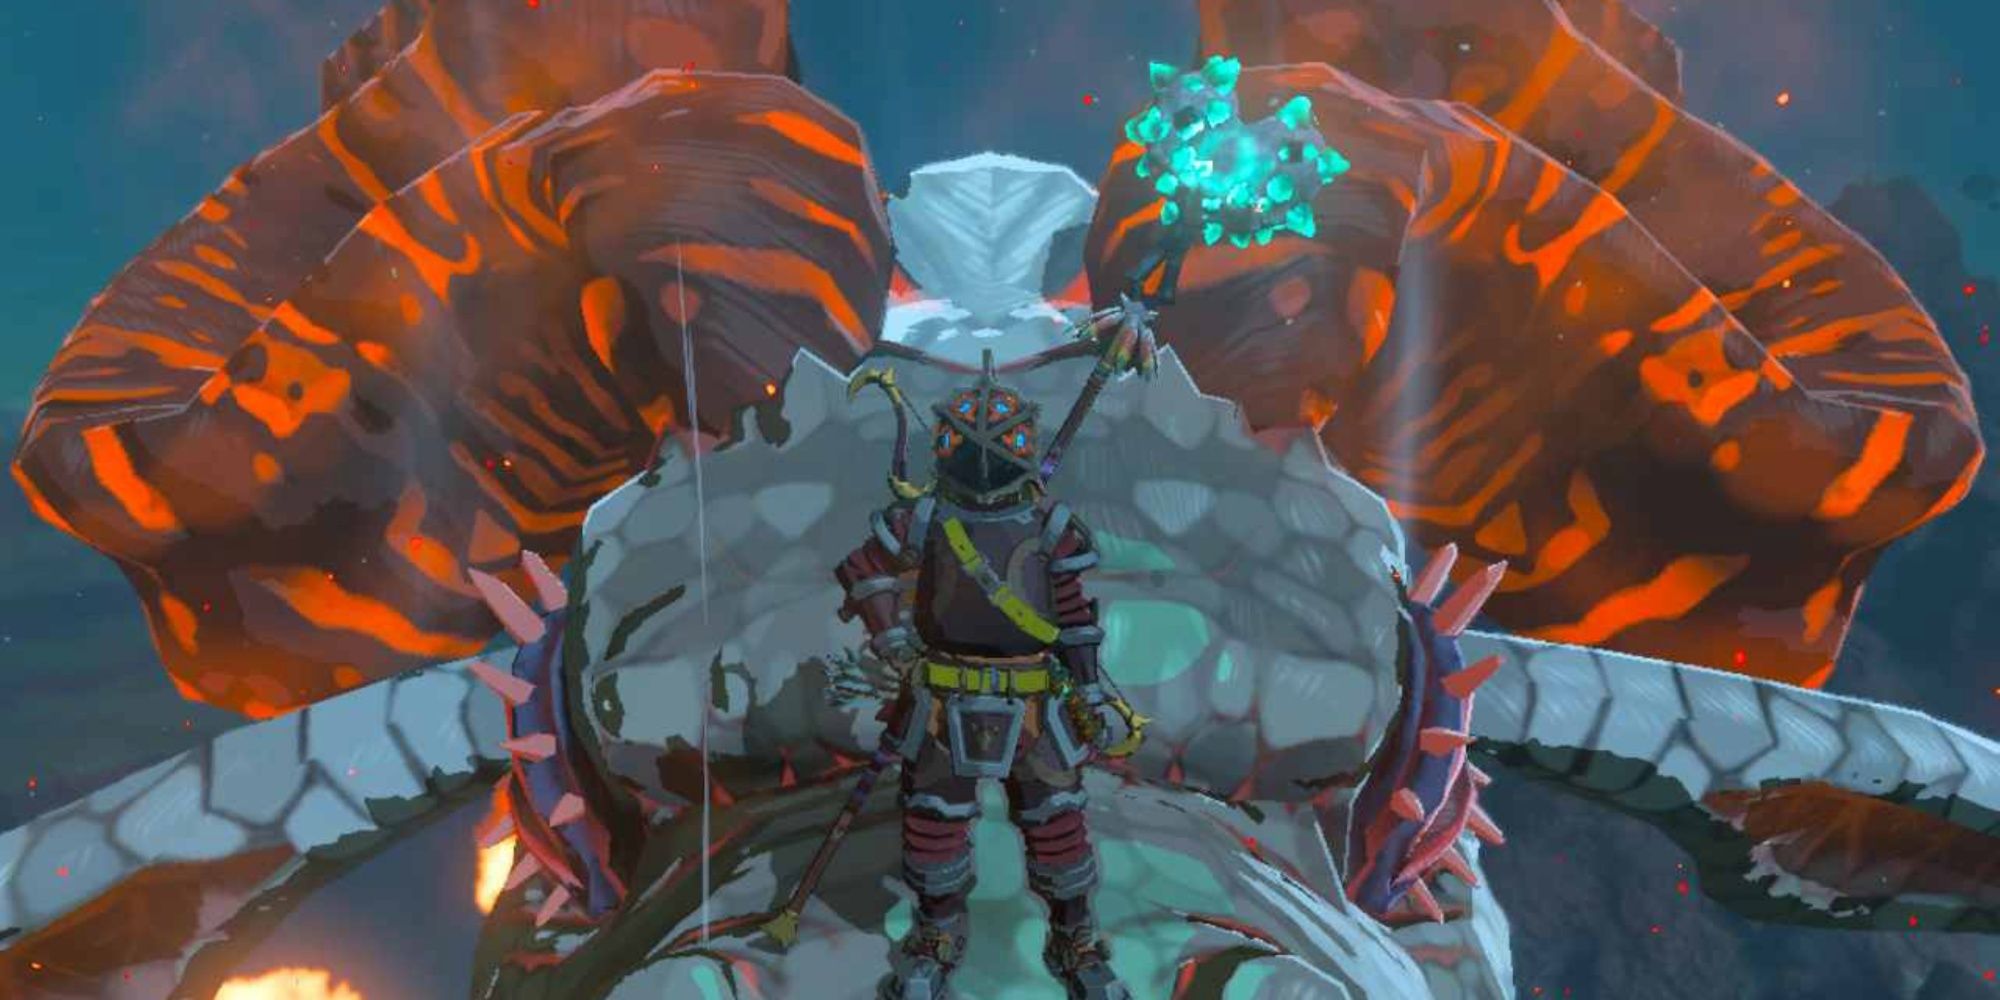 Link In Vah Rudania Helm Stands On Dinraal's Head And Takes Selfie